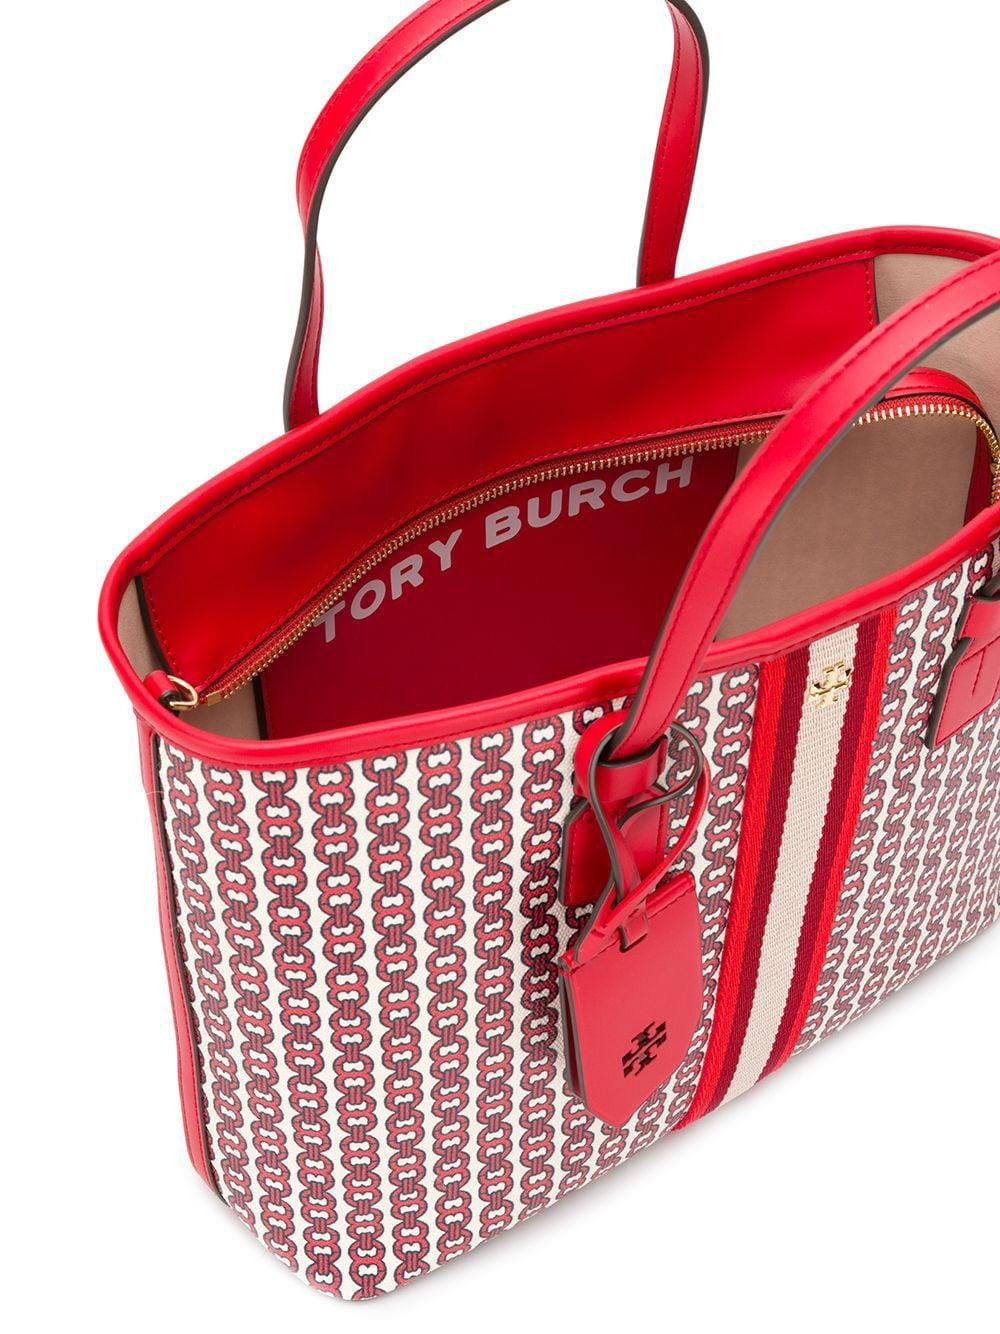 Dropship Tory Burch Gemini Link Top Zip Dutch Red Tote Bag to Sell Online  at a Lower Price